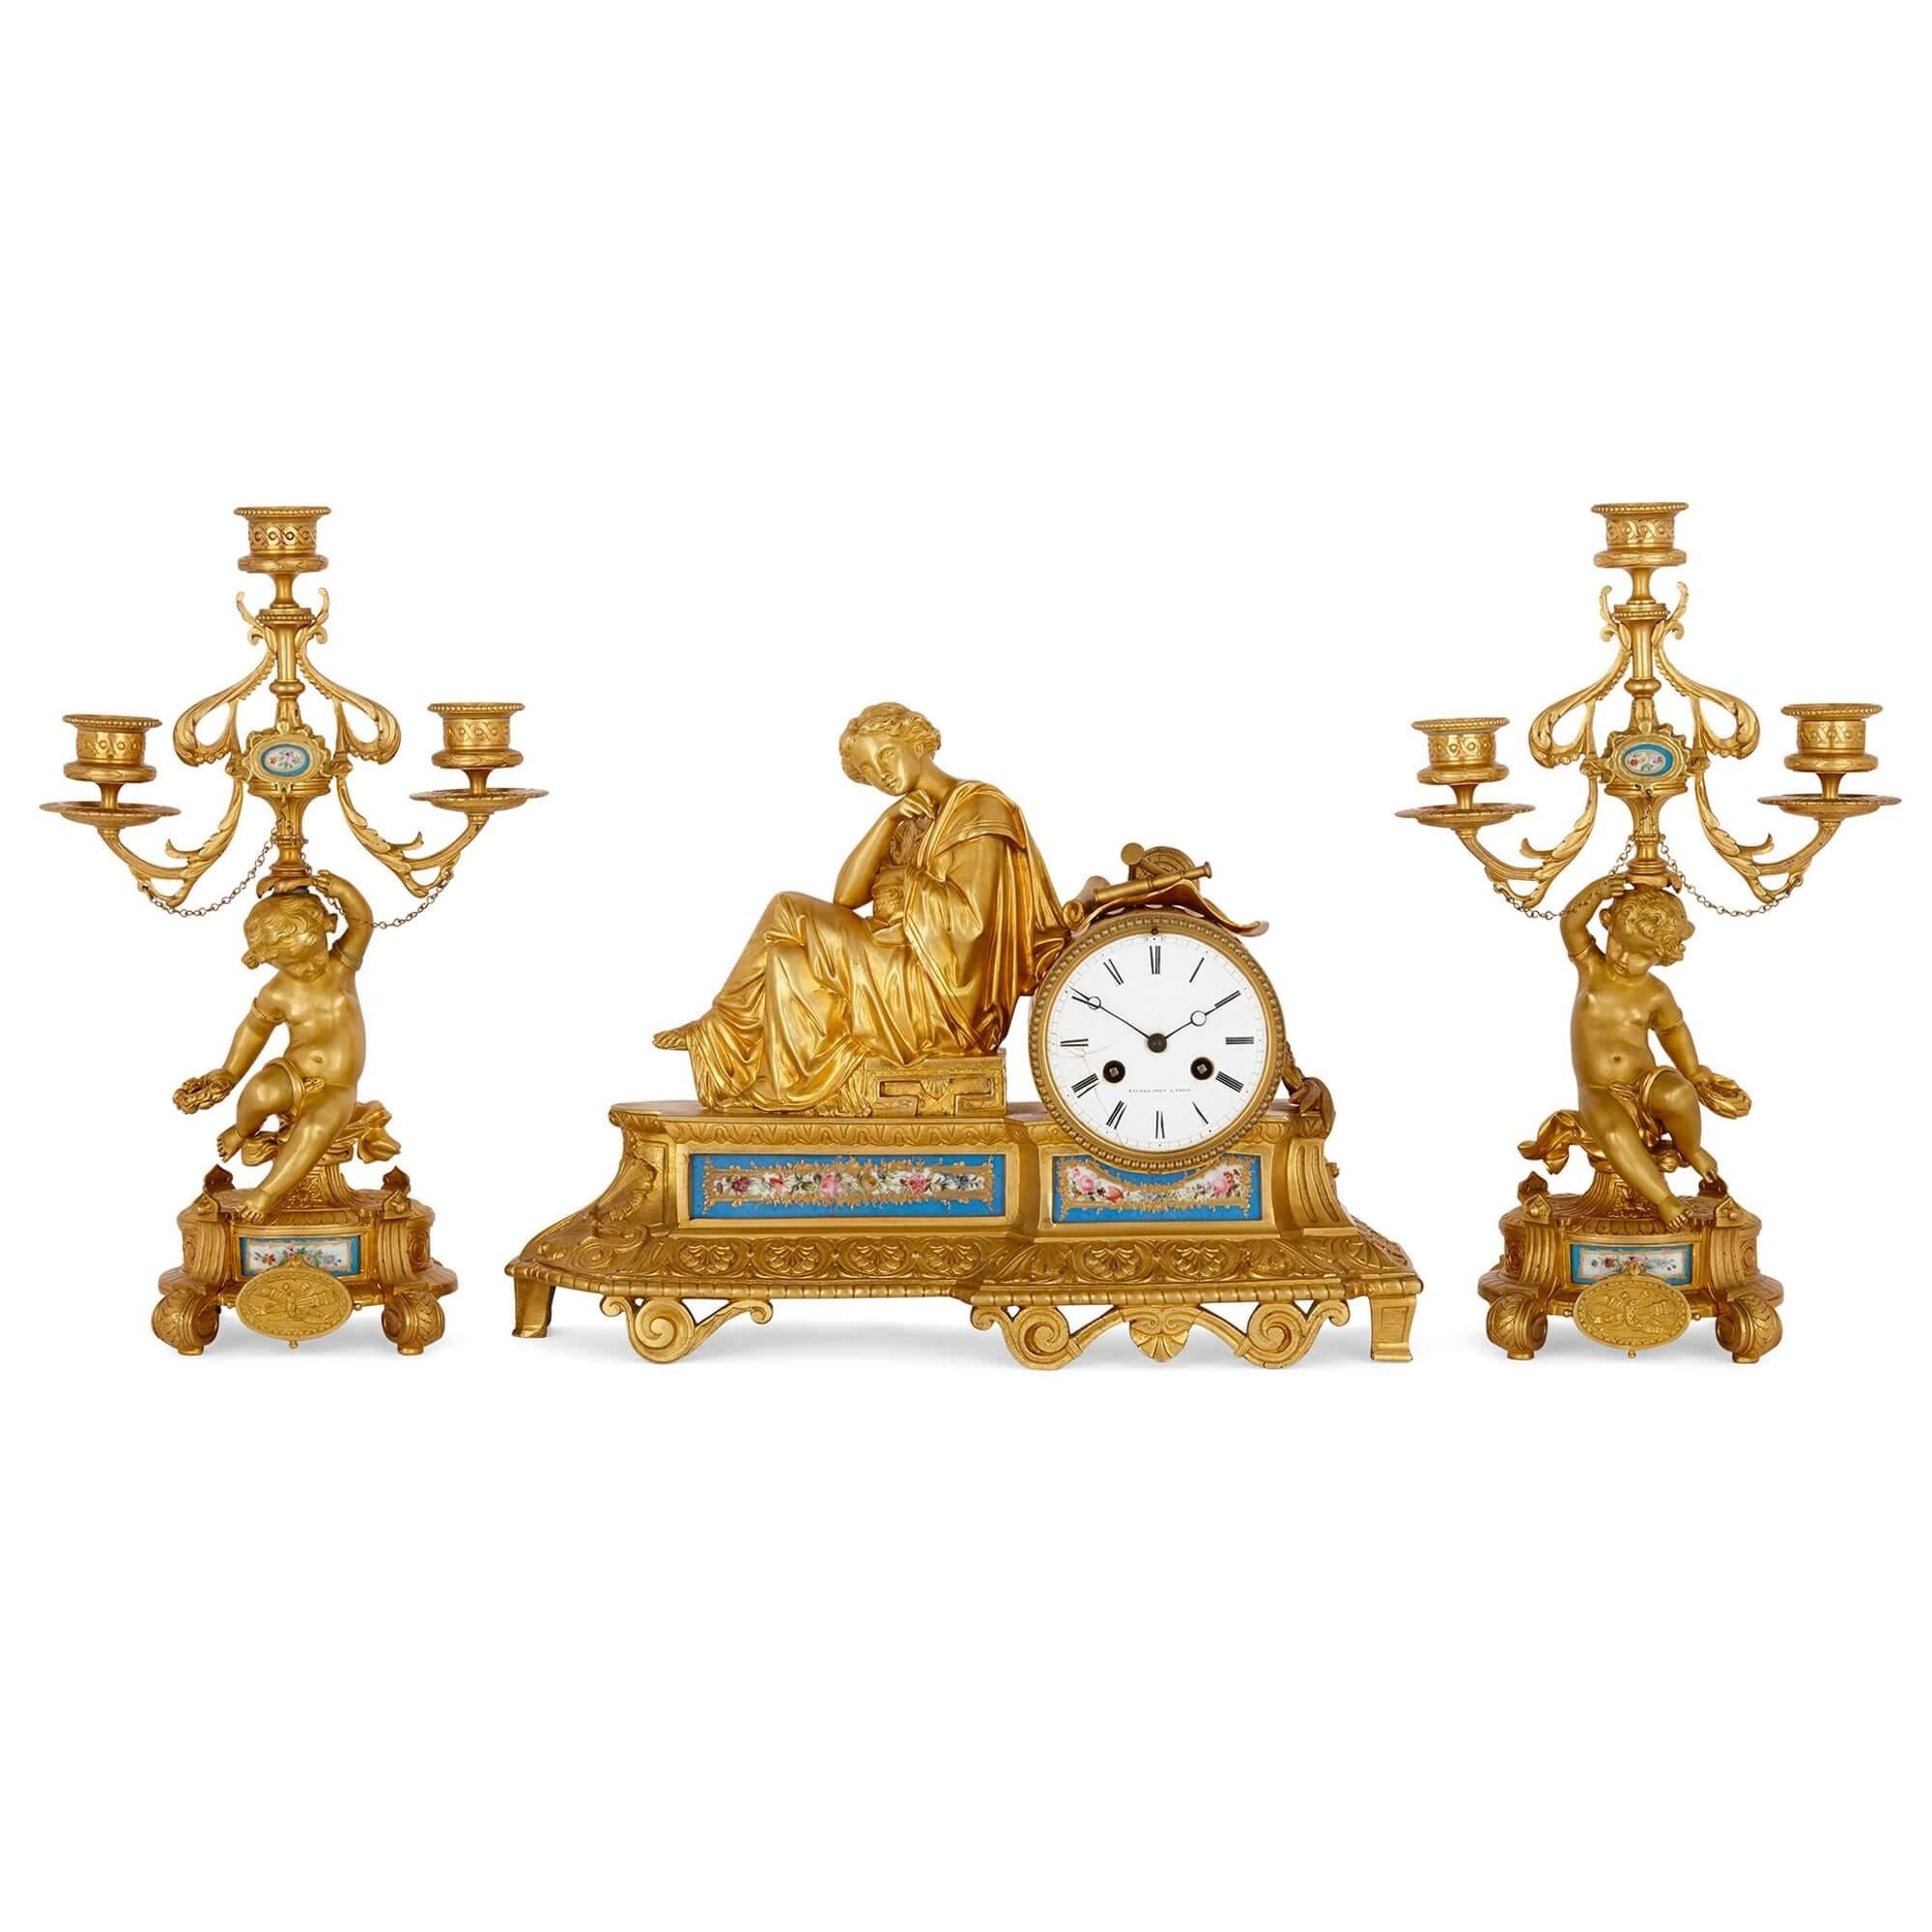 Three-piece French porcelain and gilt bronze clock set
French, late 19th Century
Clock: Height 27cm, width 36.5cm, depth 12cm
Candelabra: Height 33cm, width 20cm, depth 11.5cm

This fine three-piece clock set is by Henri Picard, one of the leading